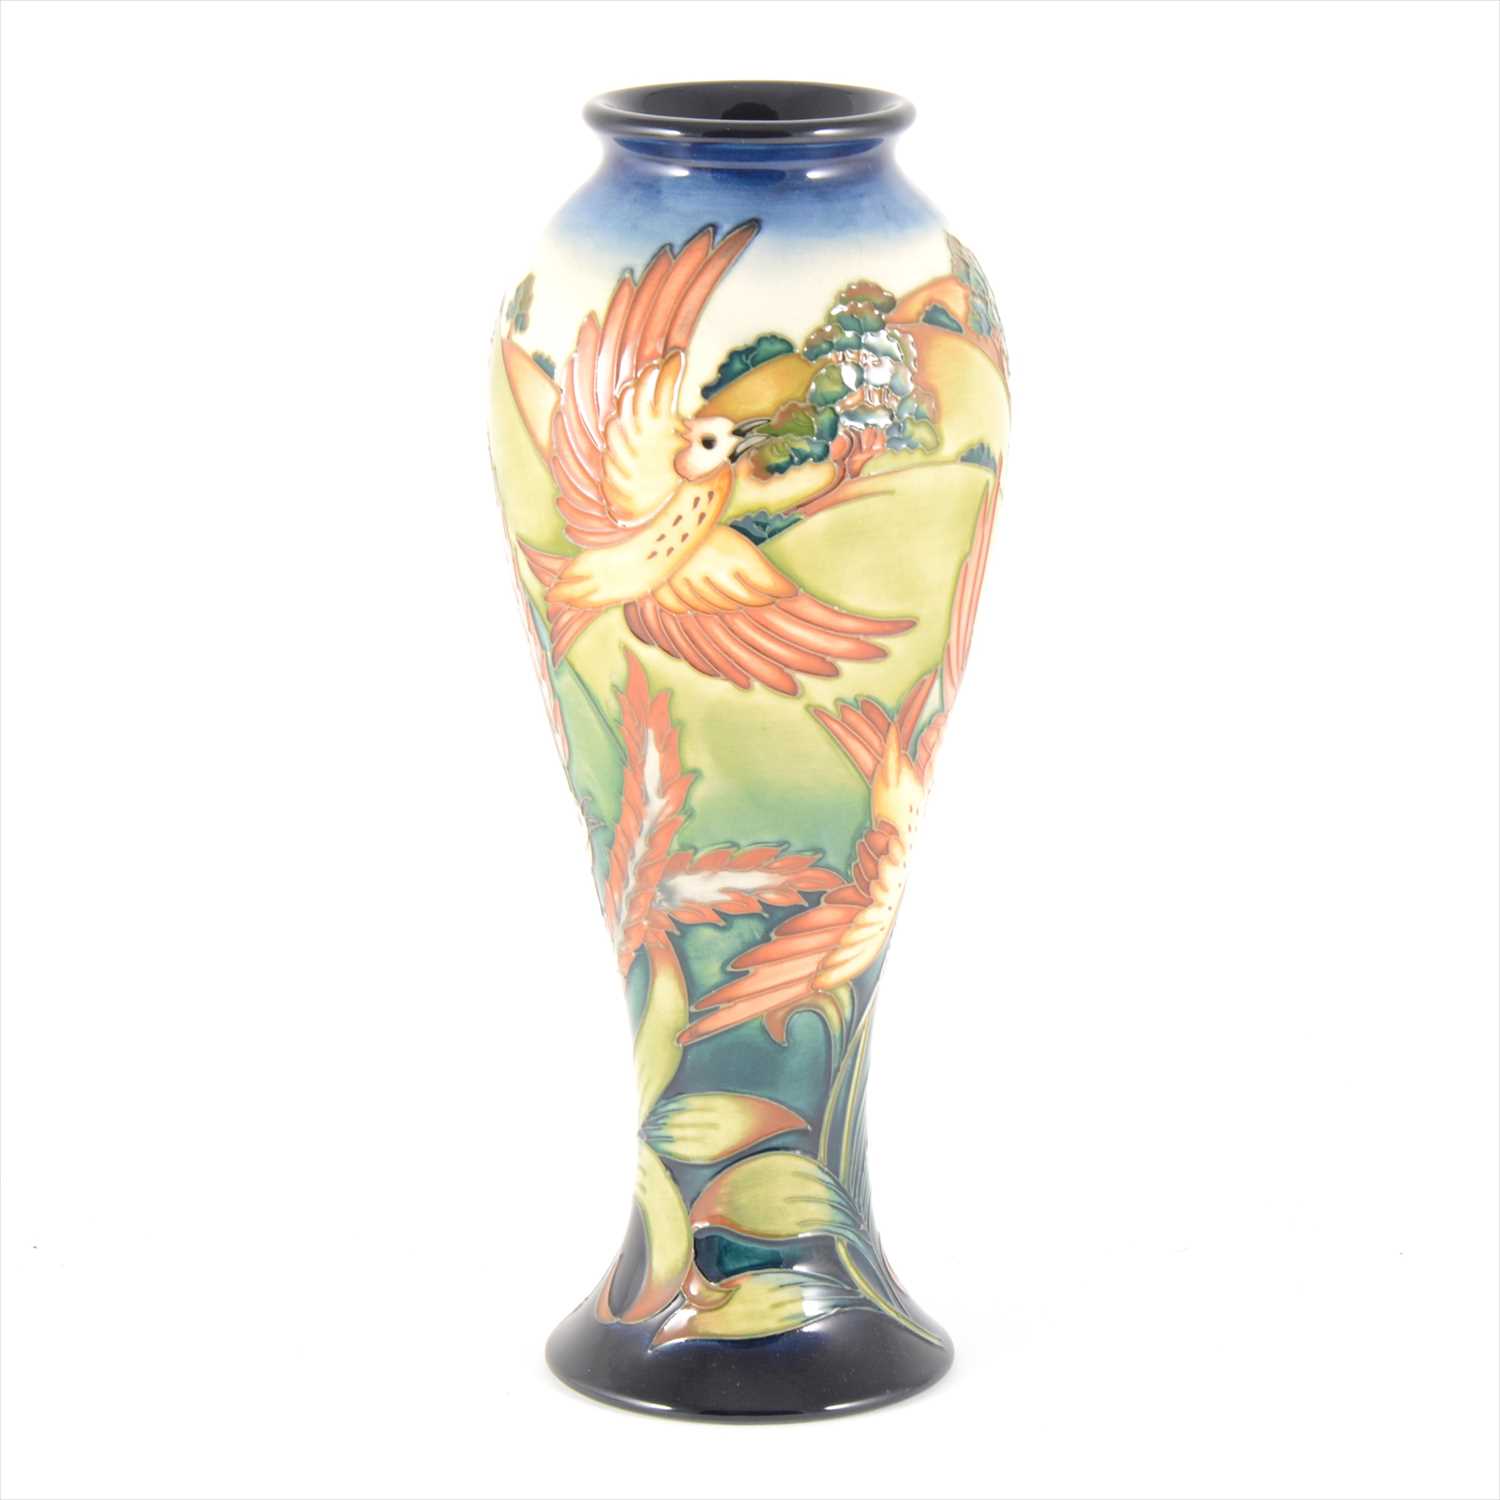 Lot 40 - A 'Lark Ascending' limited edition Moorcroft Pottery vase, designed by Philip Gibson